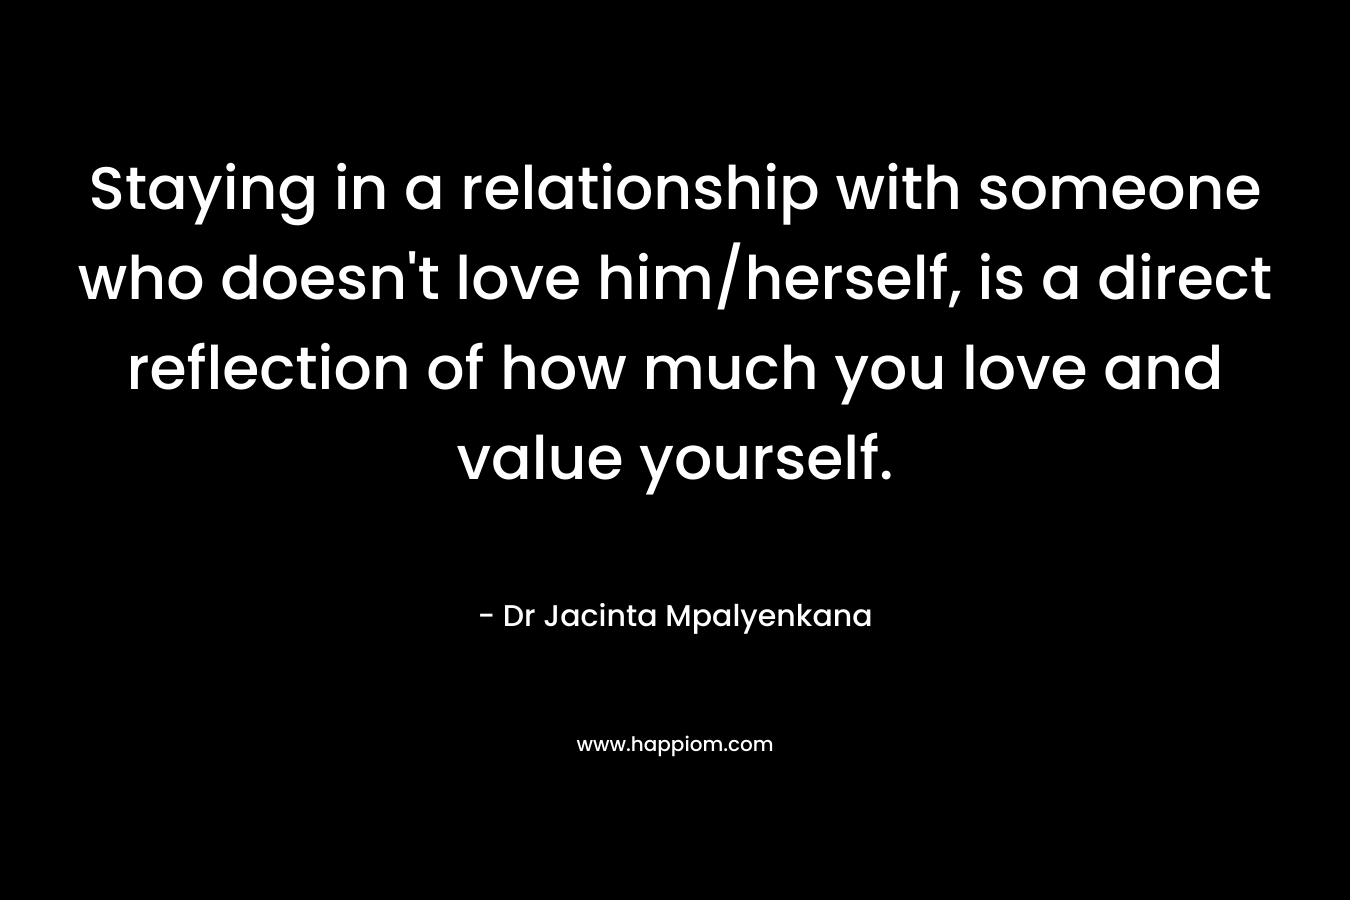 Staying in a relationship with someone who doesn't love him/herself, is a direct reflection of how much you love and value yourself.